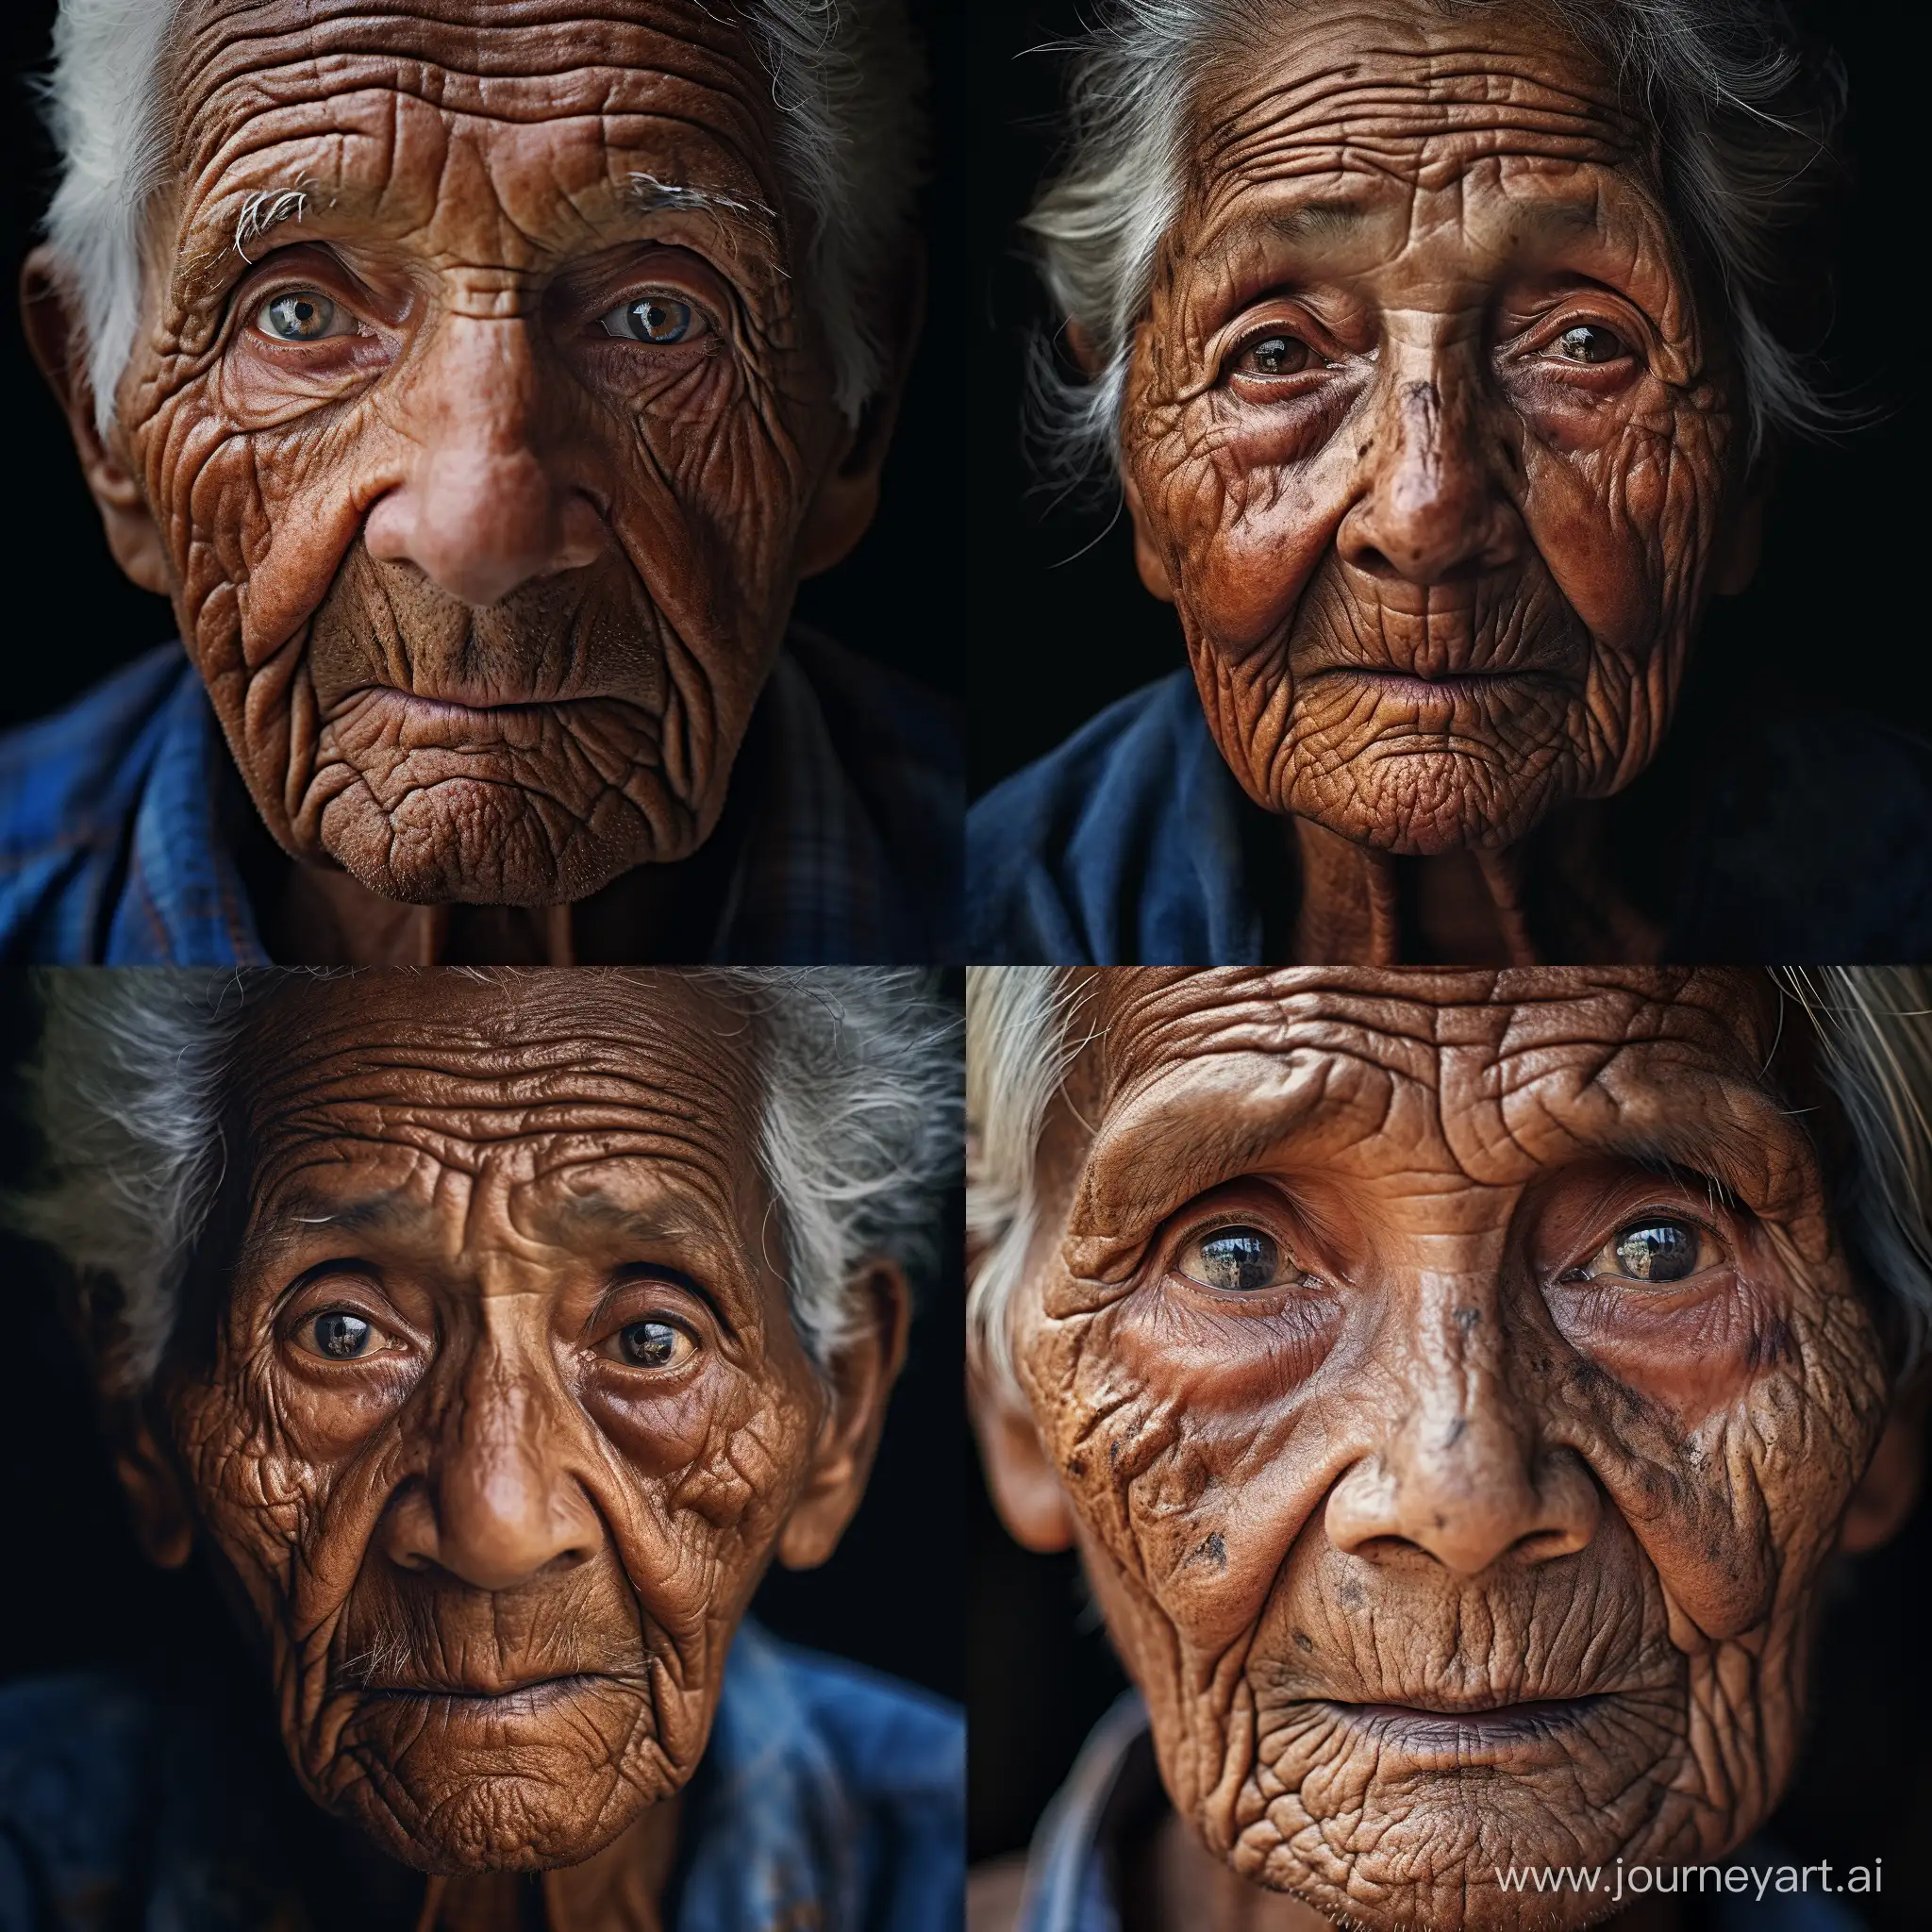 Captivating-Portrait-of-an-Elderly-Person-with-a-Lifetime-Story